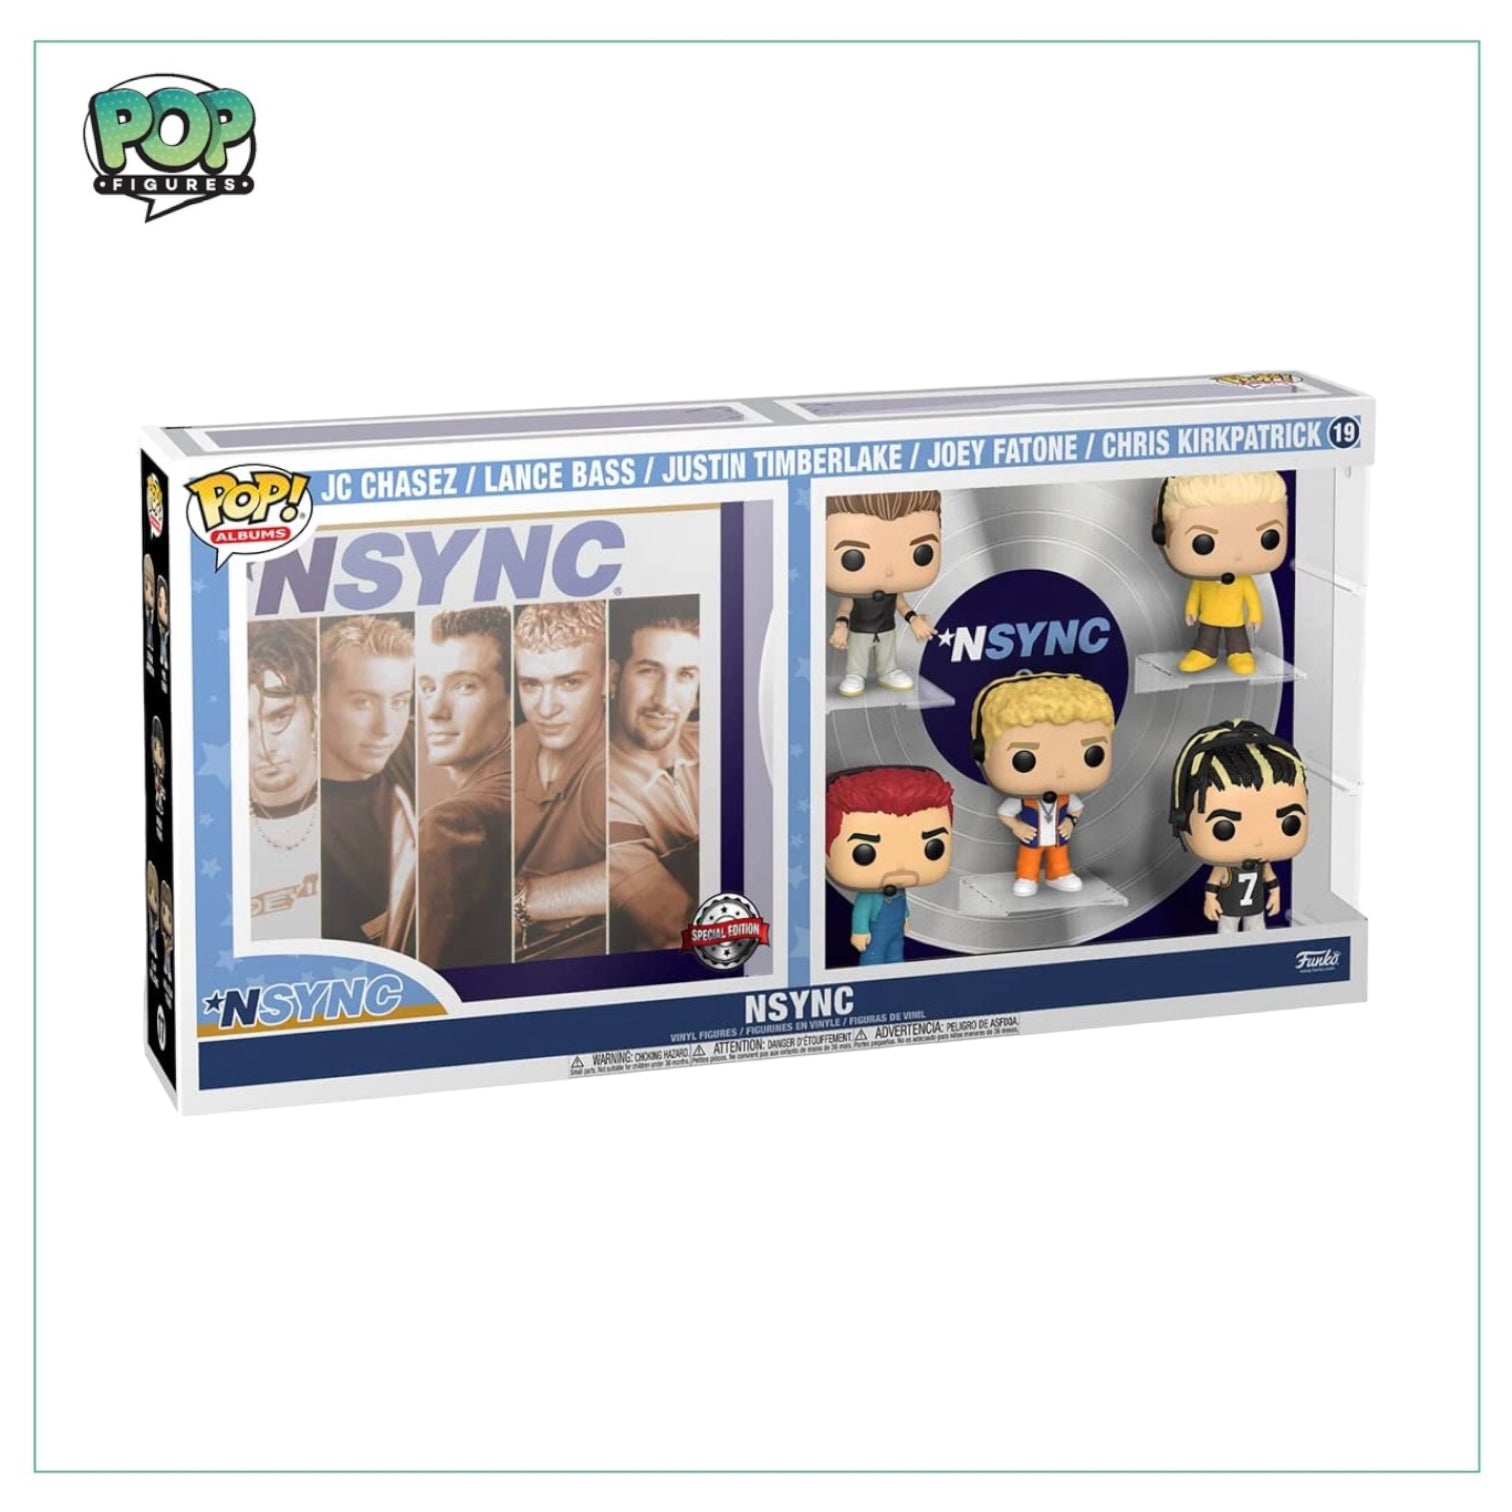 NSYNC #19 Deluxe Vinyl Album! - NSYNC - Special Edition - Angry Cat